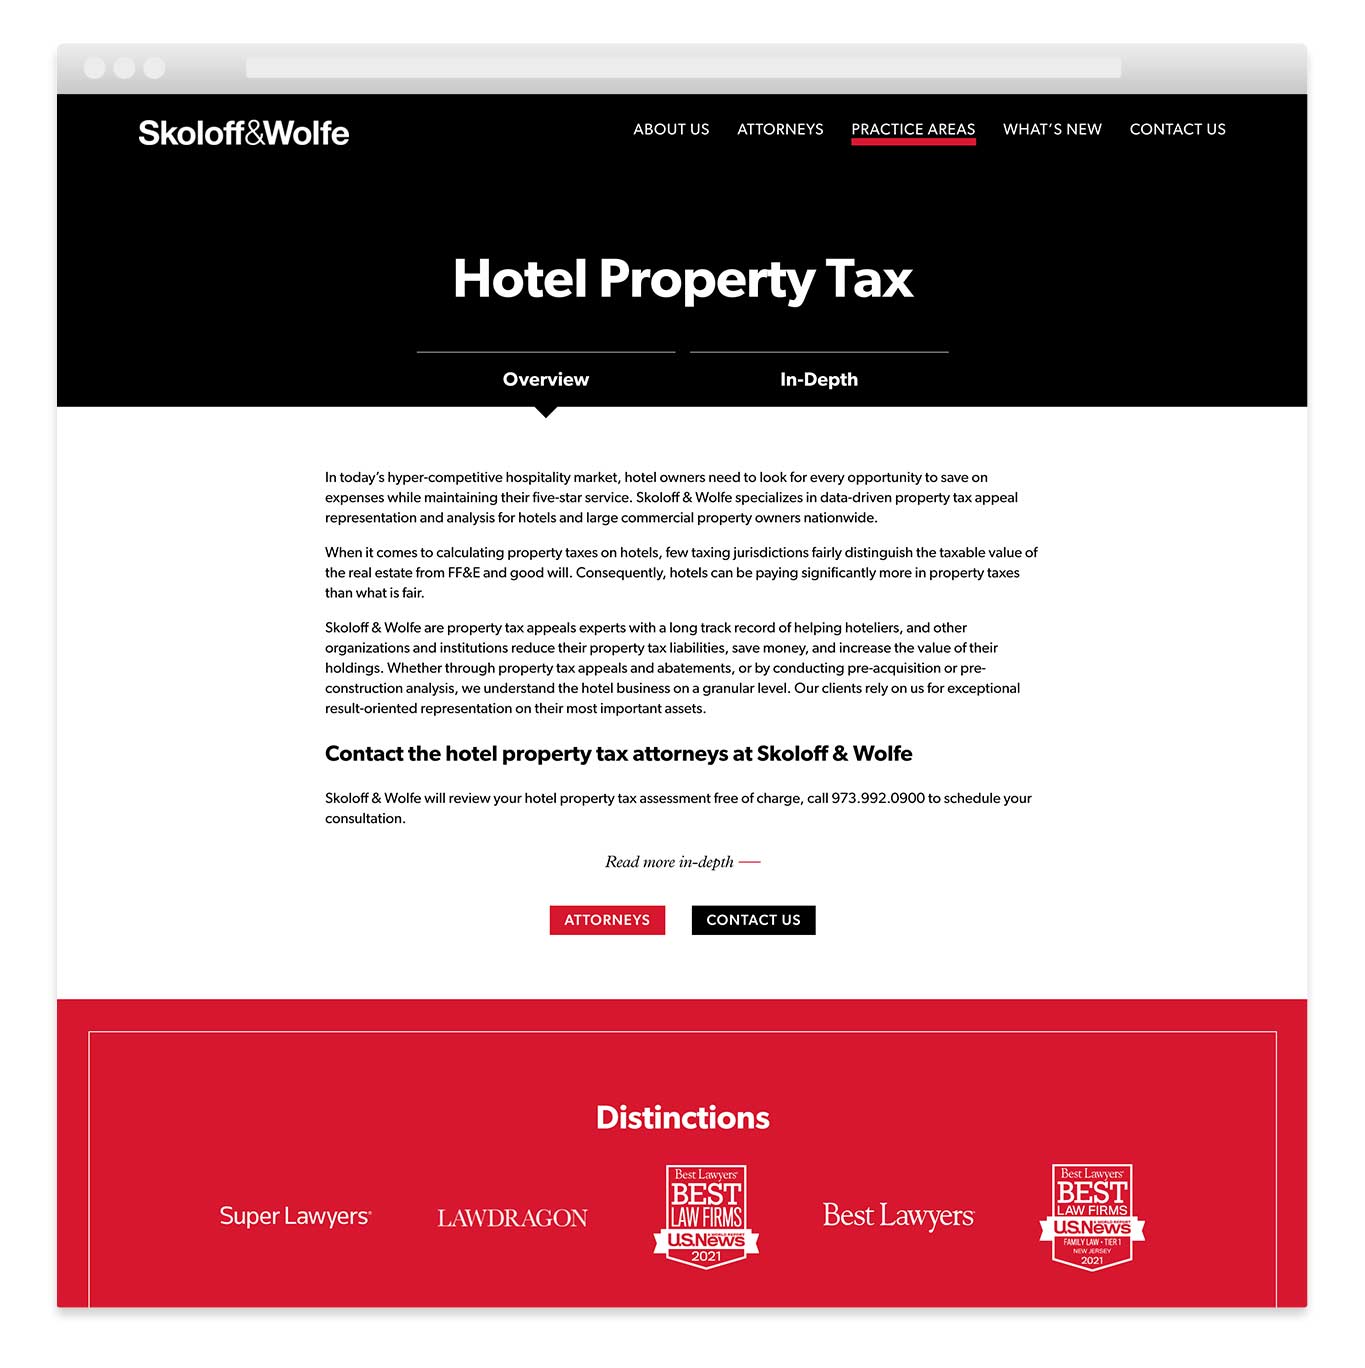 Modern law firm website hotel property tax landing page design